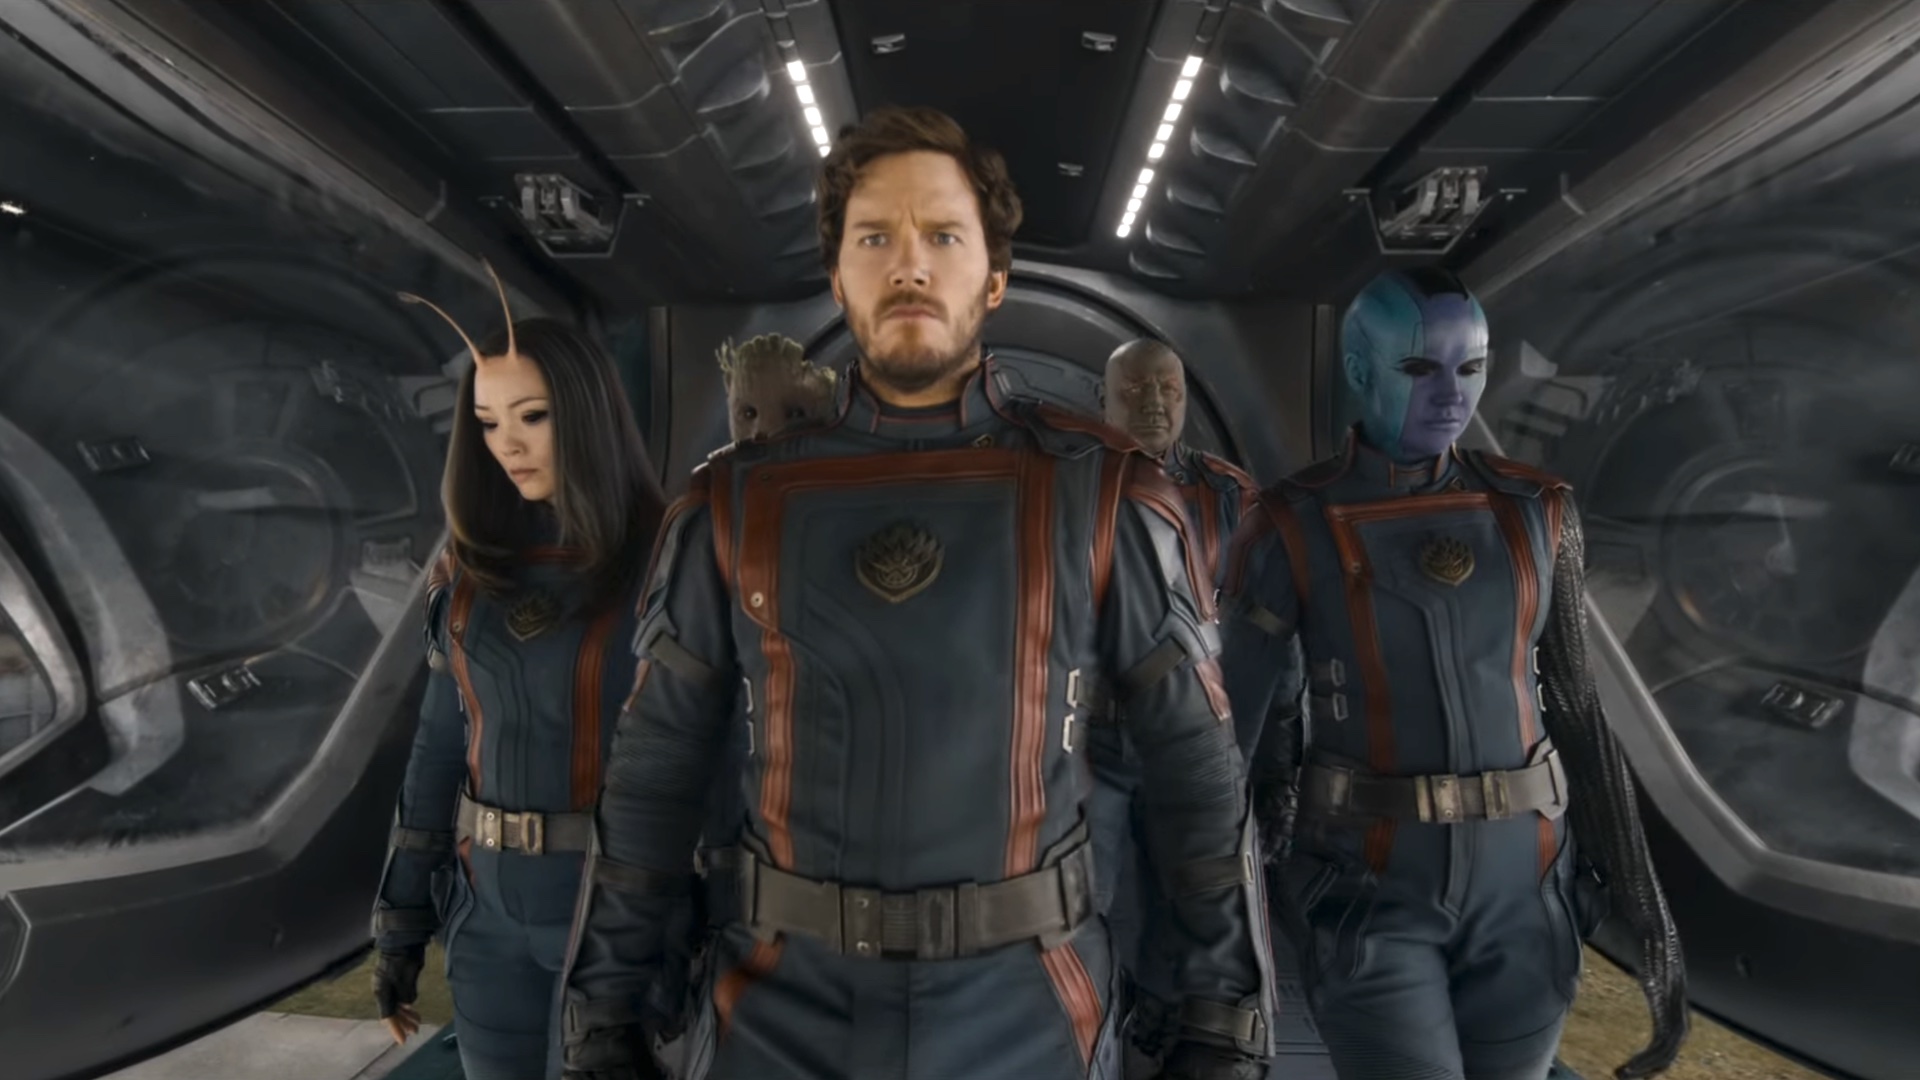 The Guardians of the Galaxy, including Mantis, Star-Lord, Groot, Drax, and Nebula, emerge from their ship